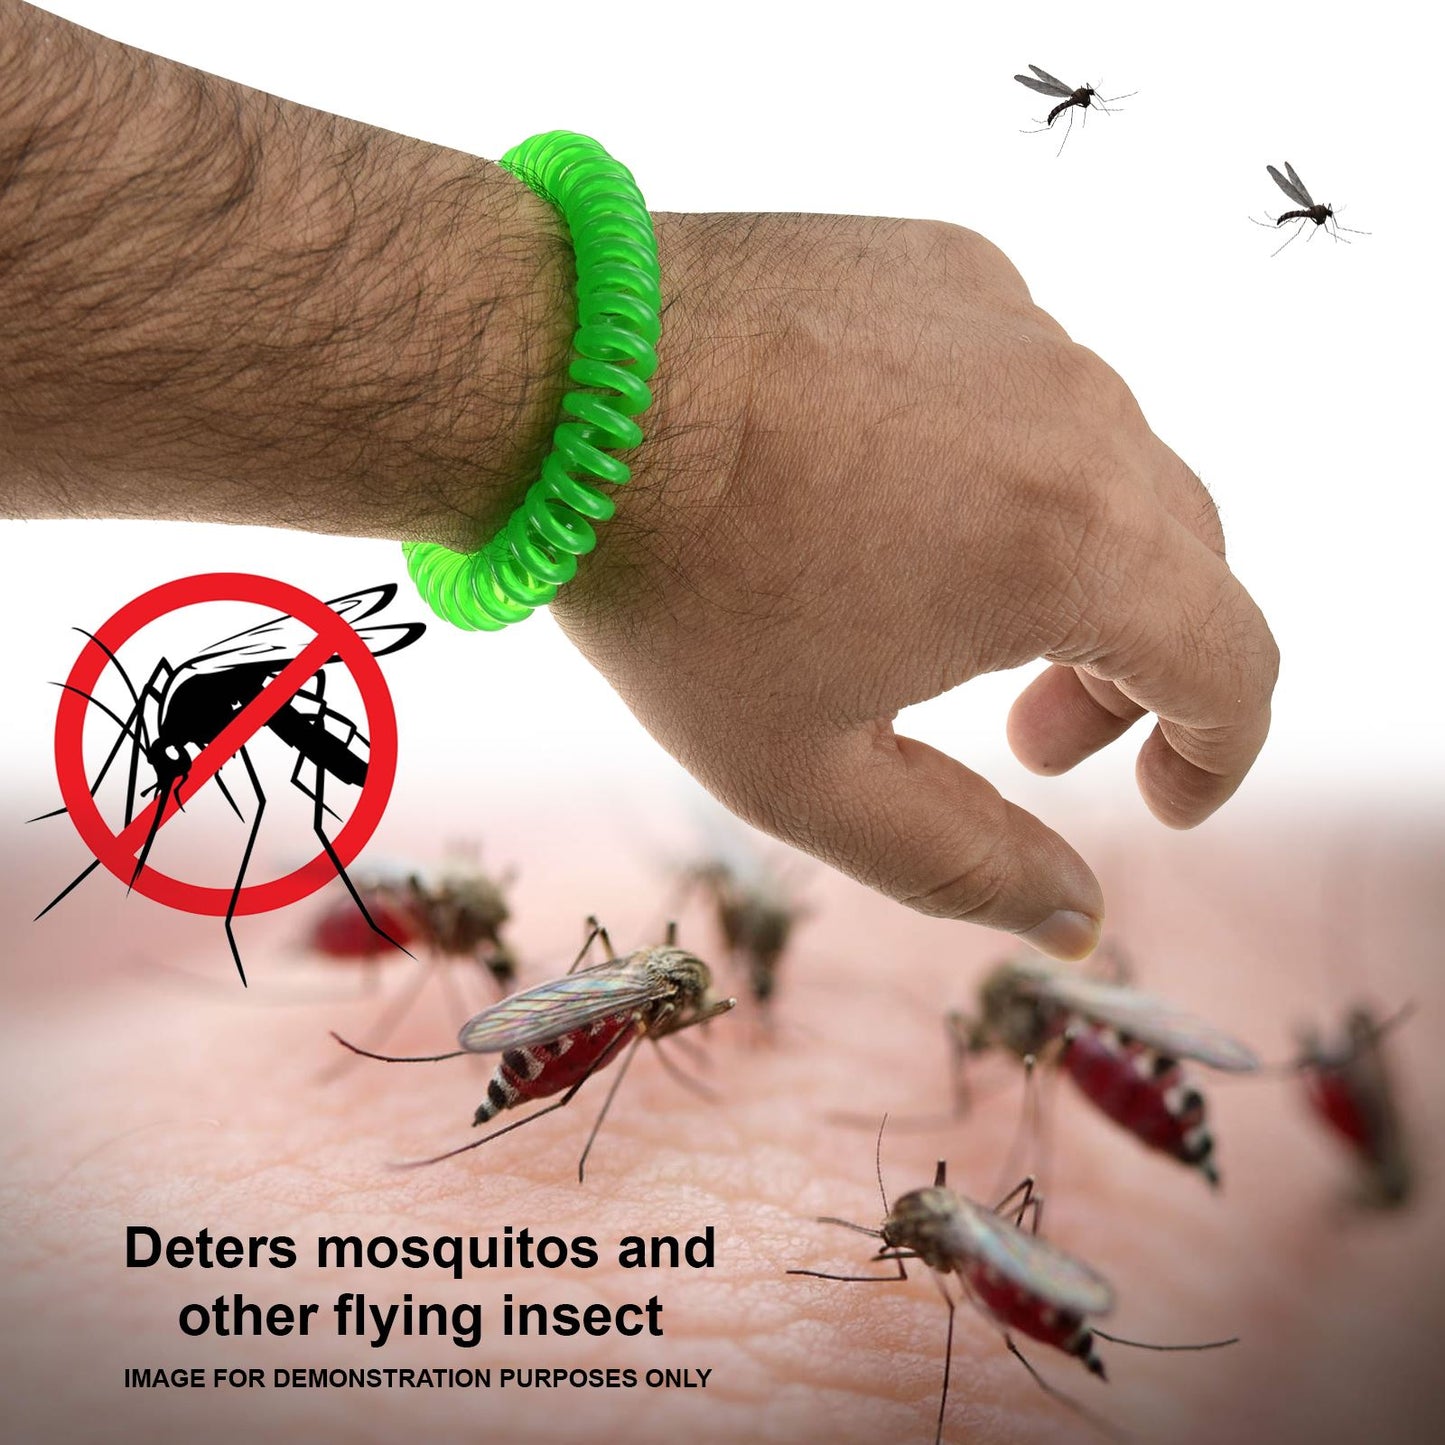 Stay Bug-Free with a Citronella Aroma Band